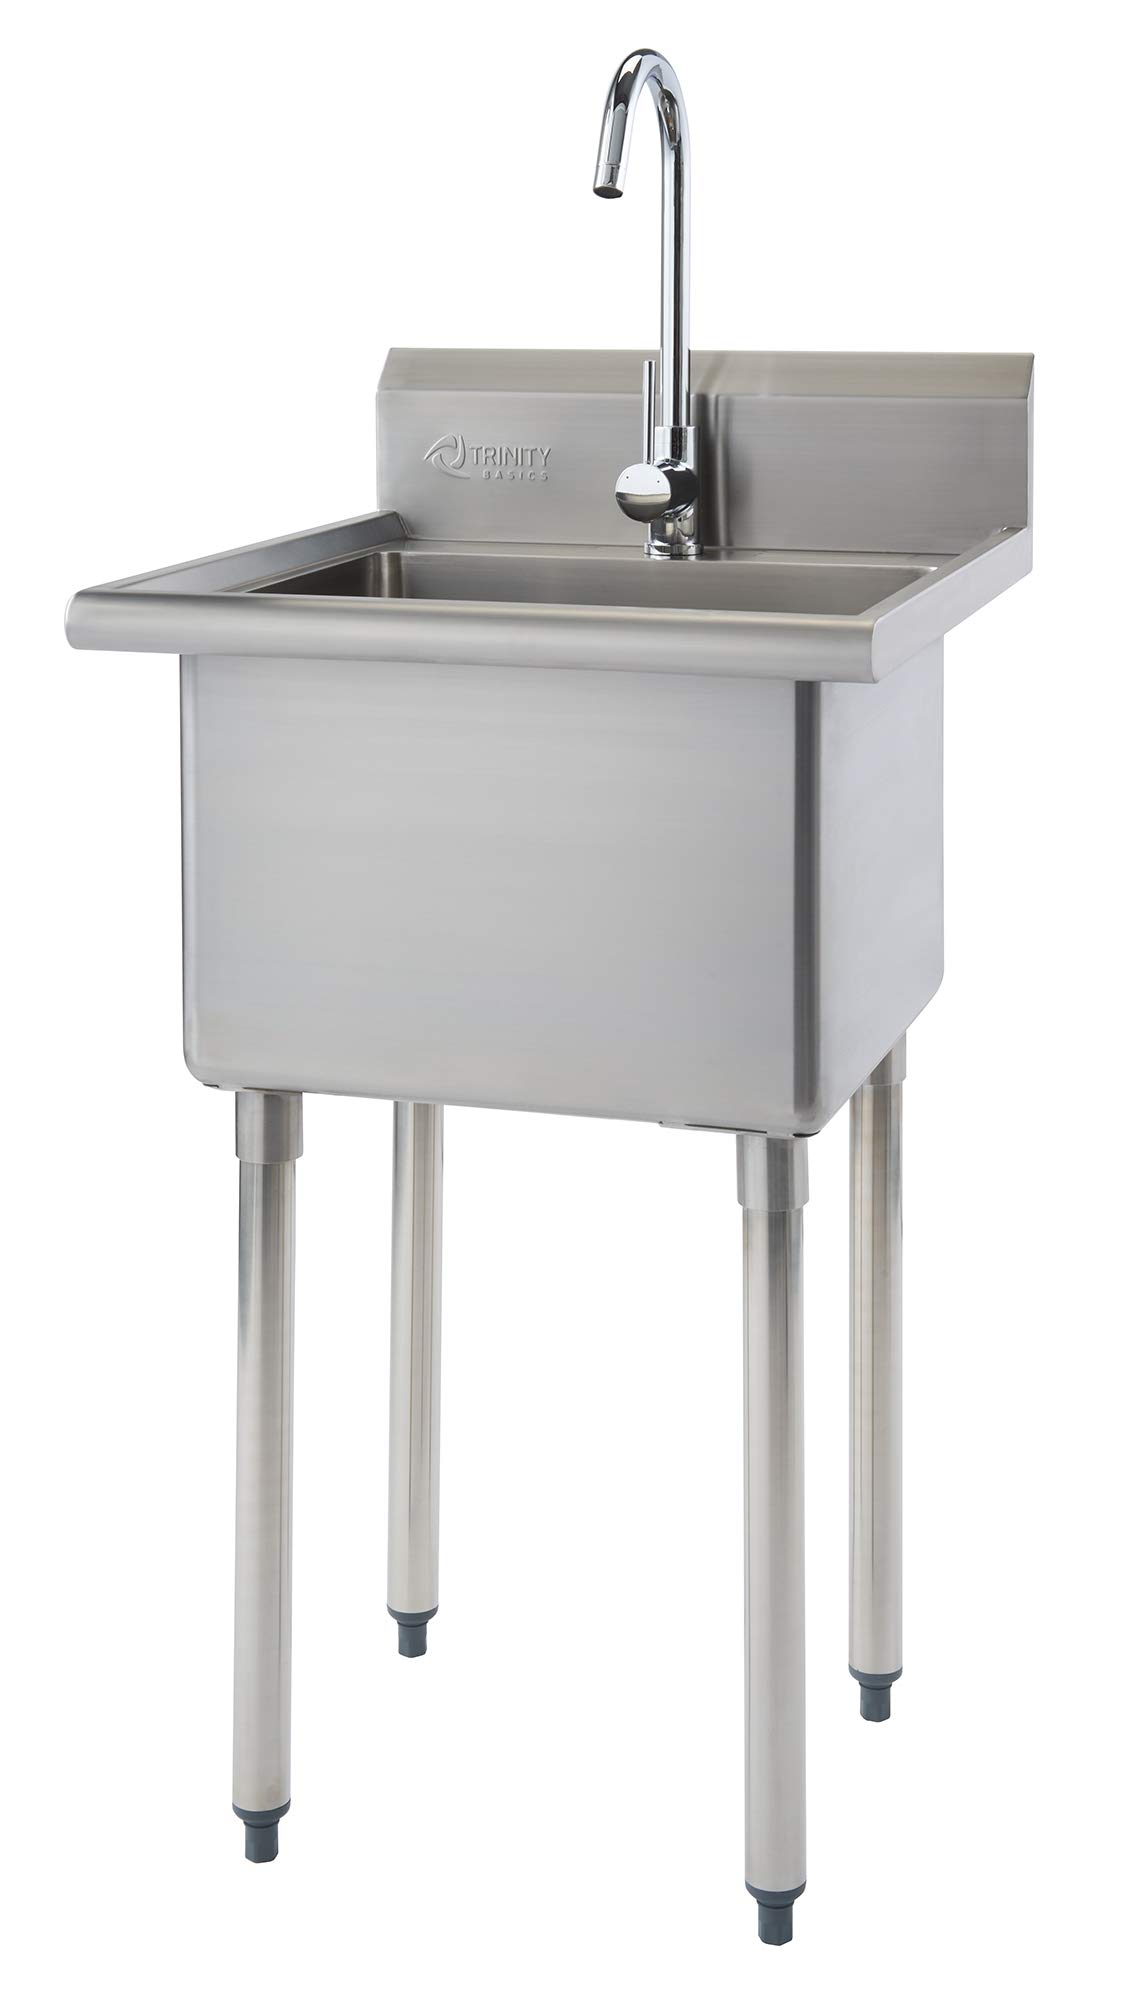 TRINITY THA-0307 Basics Stainless Steel Freestanding Single Bowl Utility Sink for Garage, Laundry Room, and Restaurants, Includes Faucet, NSF Certified, 49.2 21.5 24-Inch, Chrome